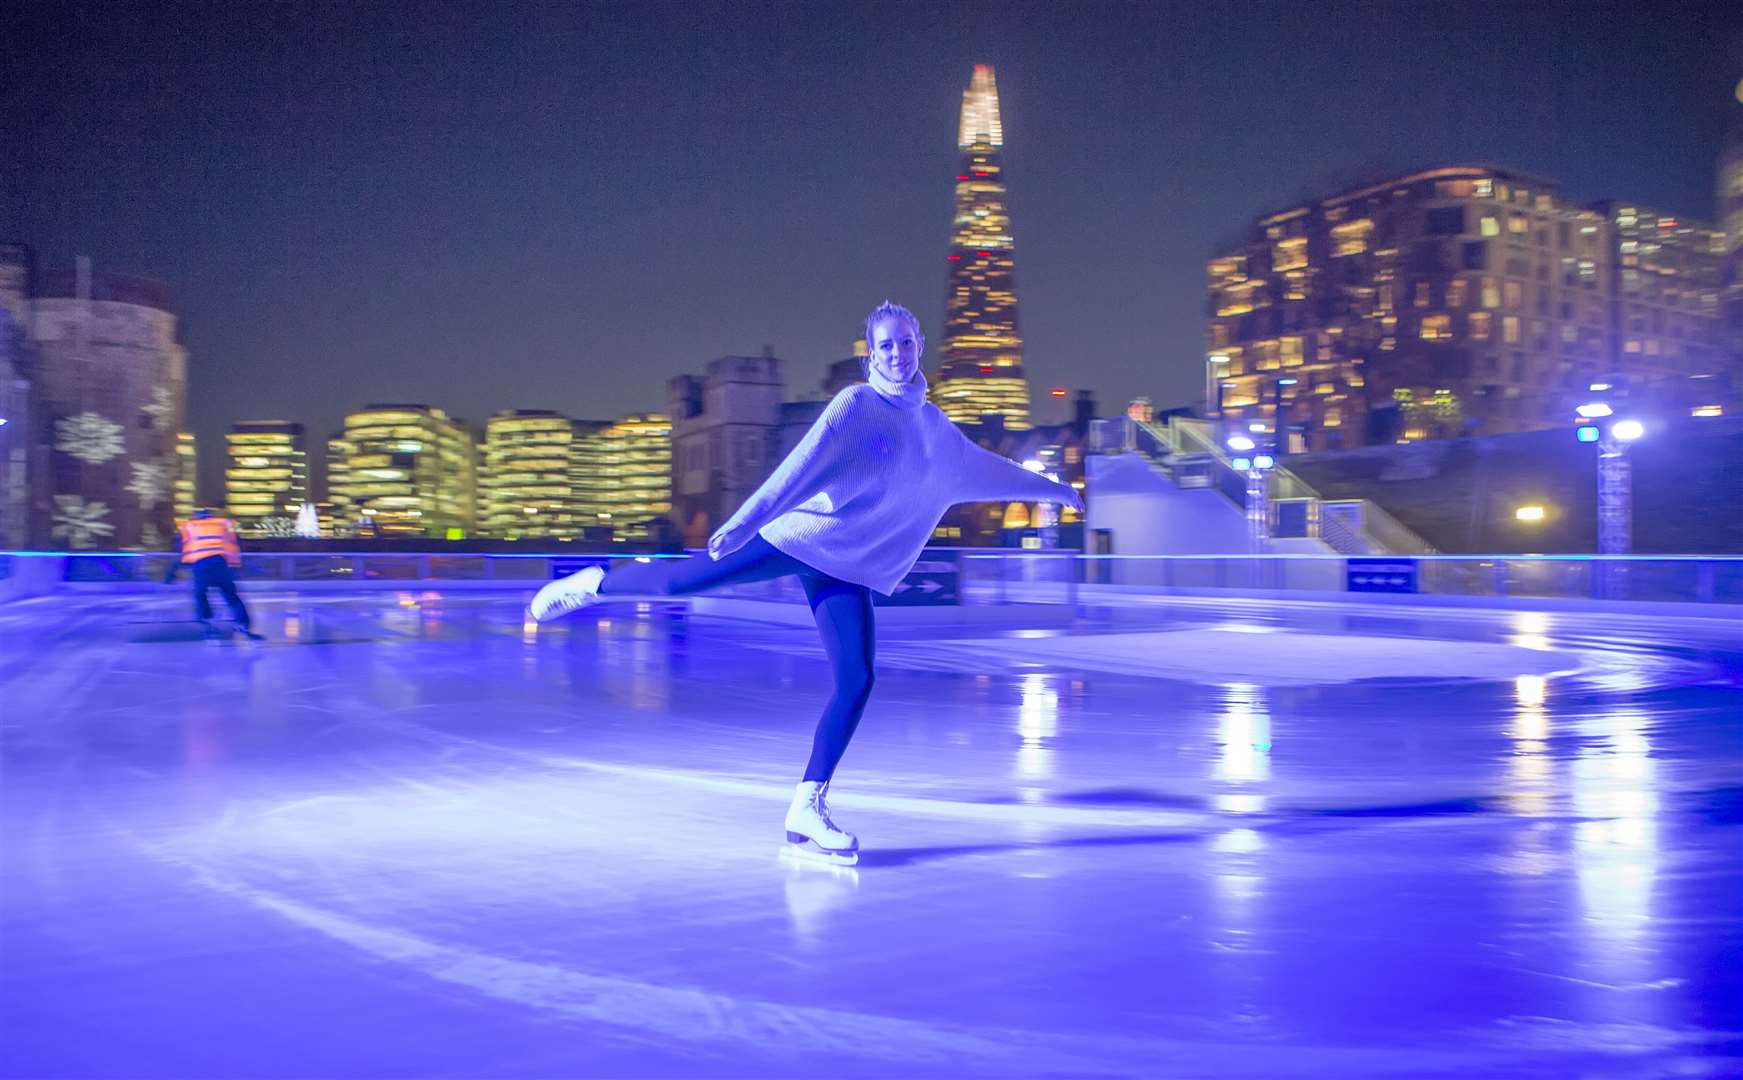 Tower of London ice rink opens for Christmas in November